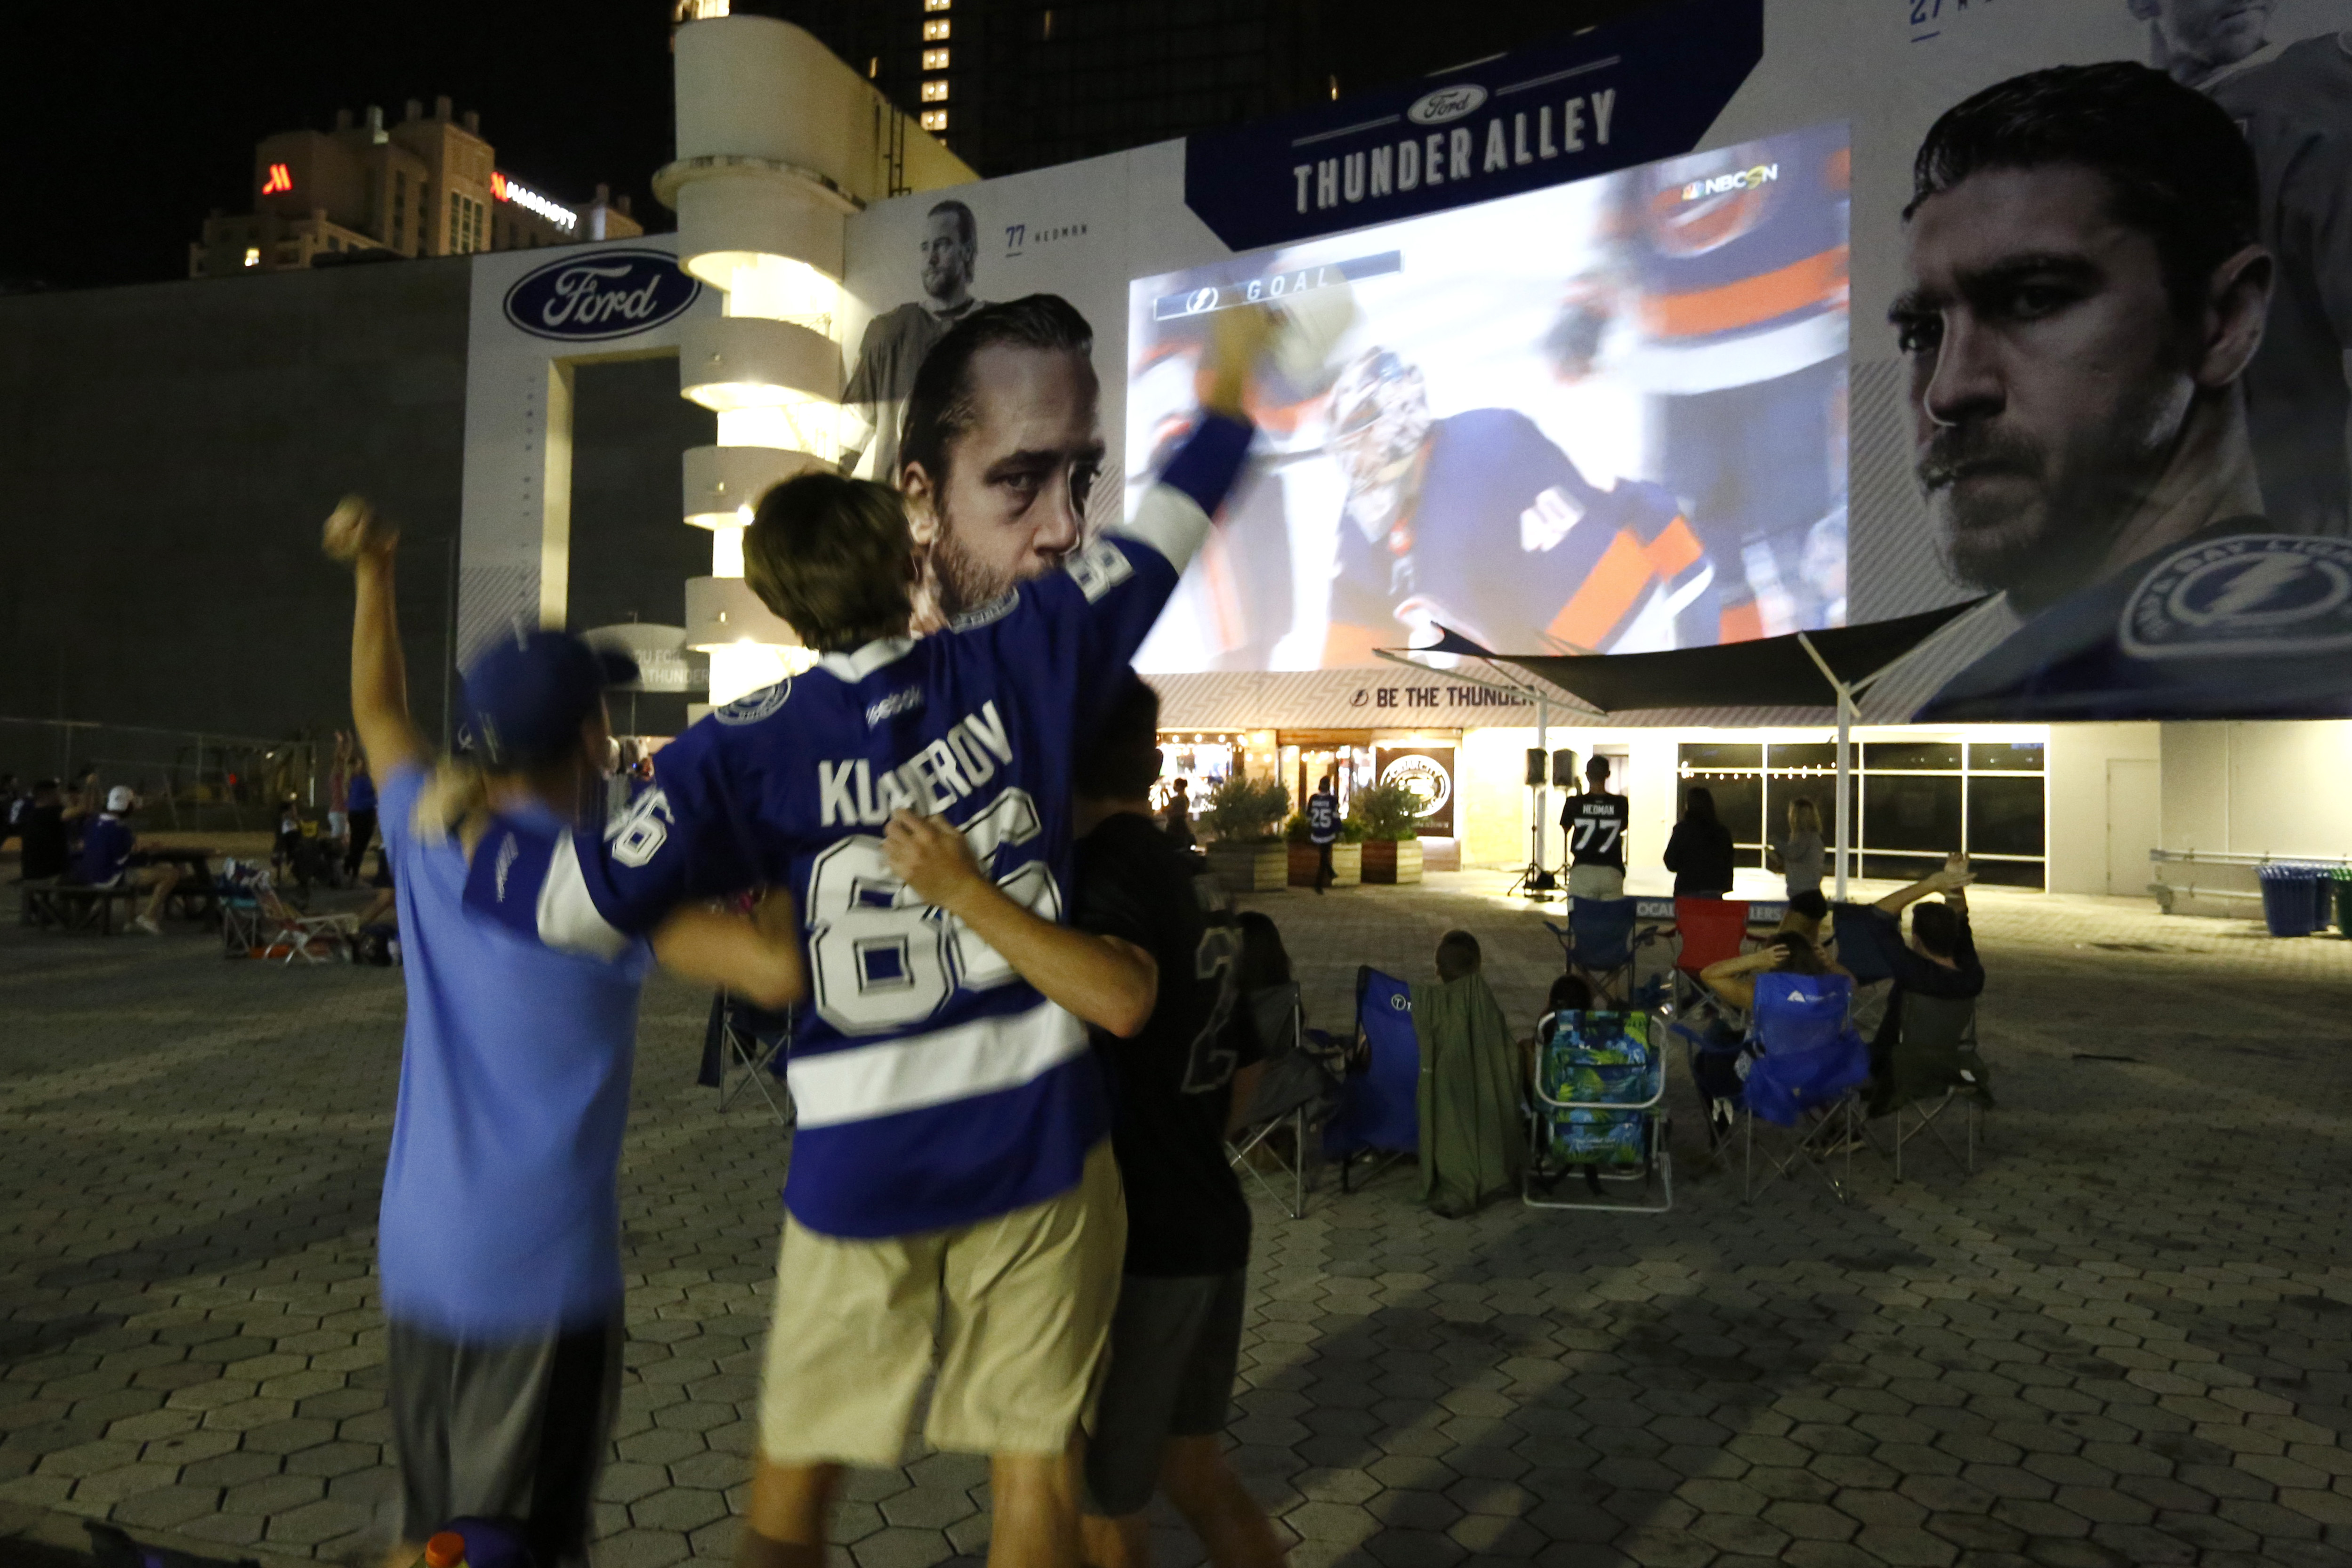 Fan's Guide to Tampa Bay Lightning: Tickets, 5+ Tips & More